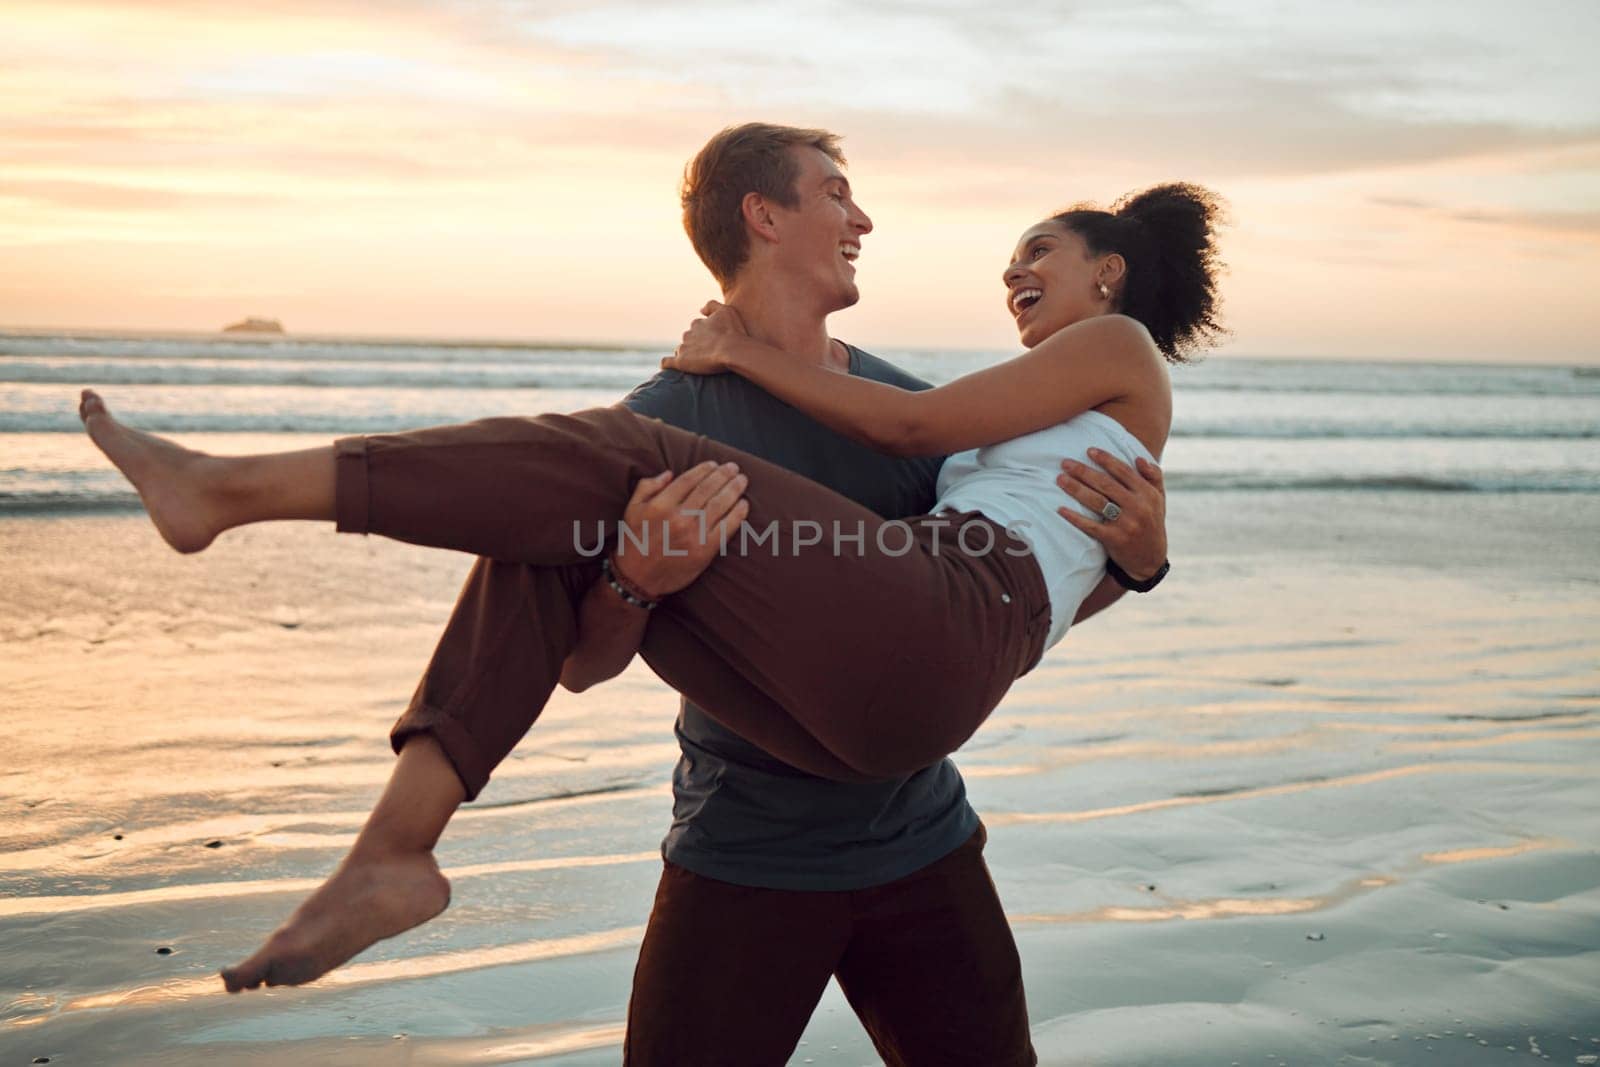 Man at beach lift woman with love, smile with sunset on travel holiday in Hawaii. Young couple travel to ocean on vacation, happy and play together with sunset at sea or waves in nature during summer.